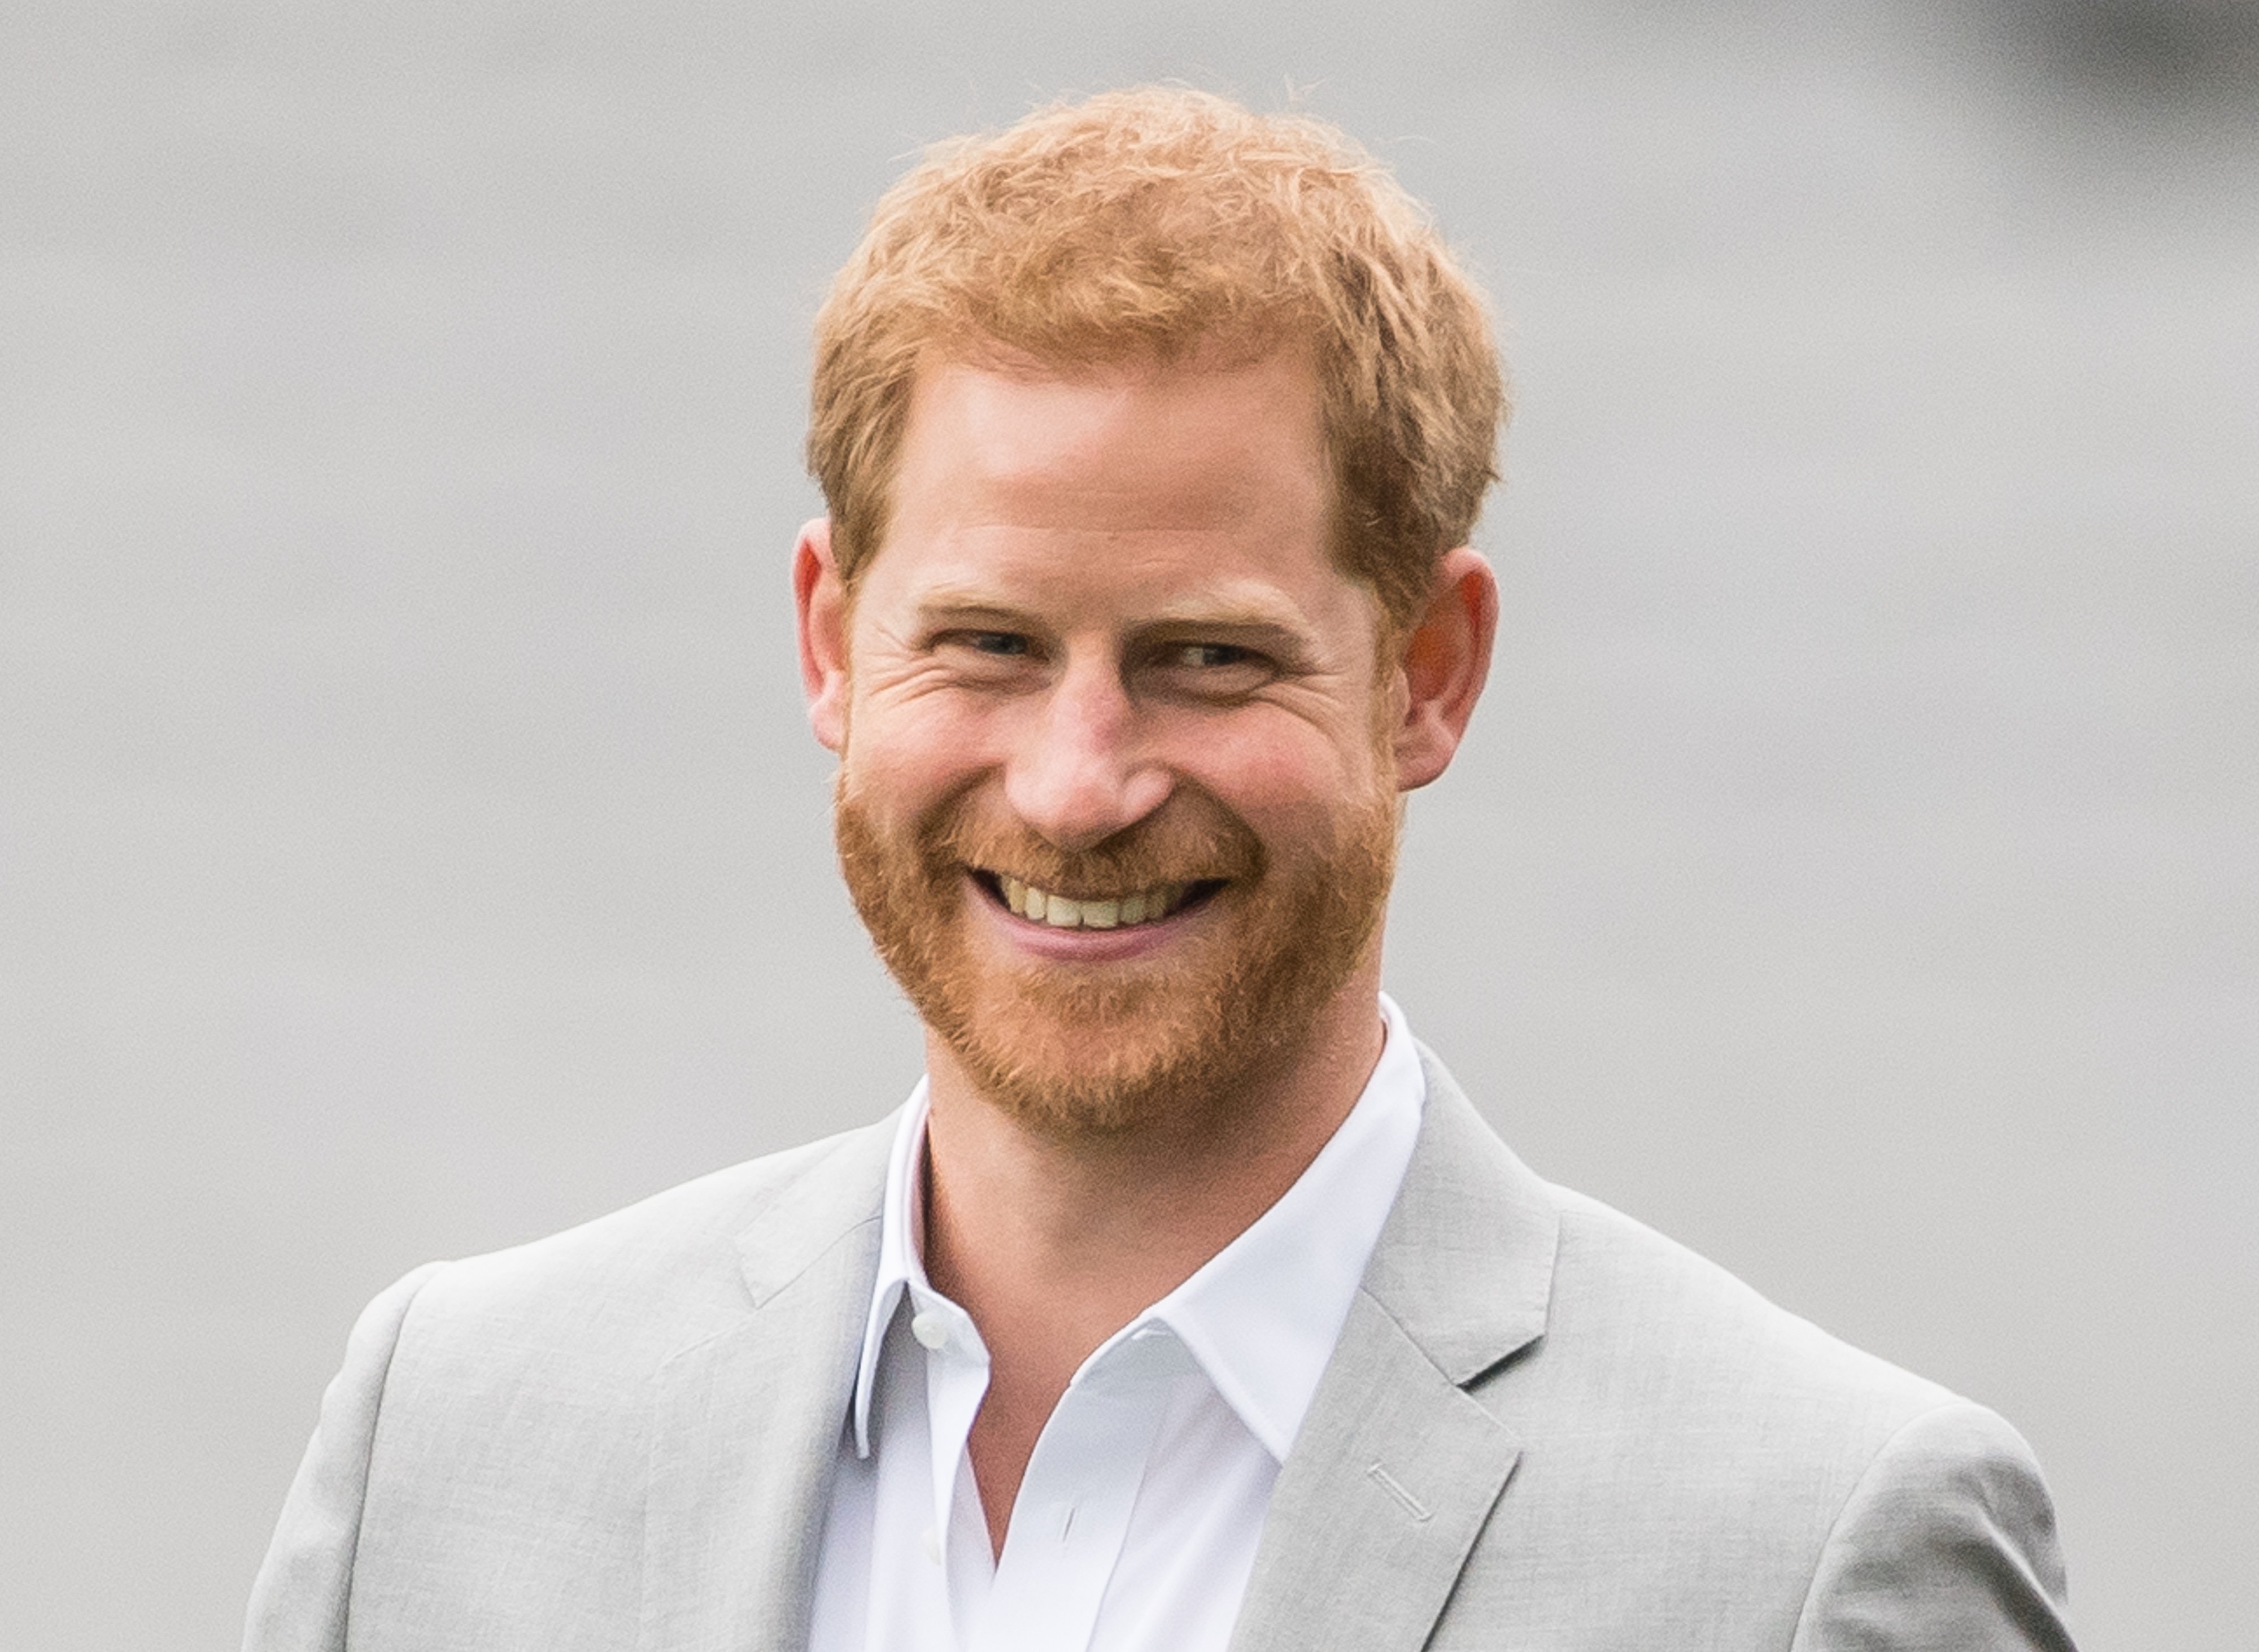 Prince Harry, Duke of Sussex visits Croke Park, home of Ireland's largest sporting organisation, the Gaelic Athletic Association on July 11, 2018 in Dublin, Ireland. |Source: Getty Images